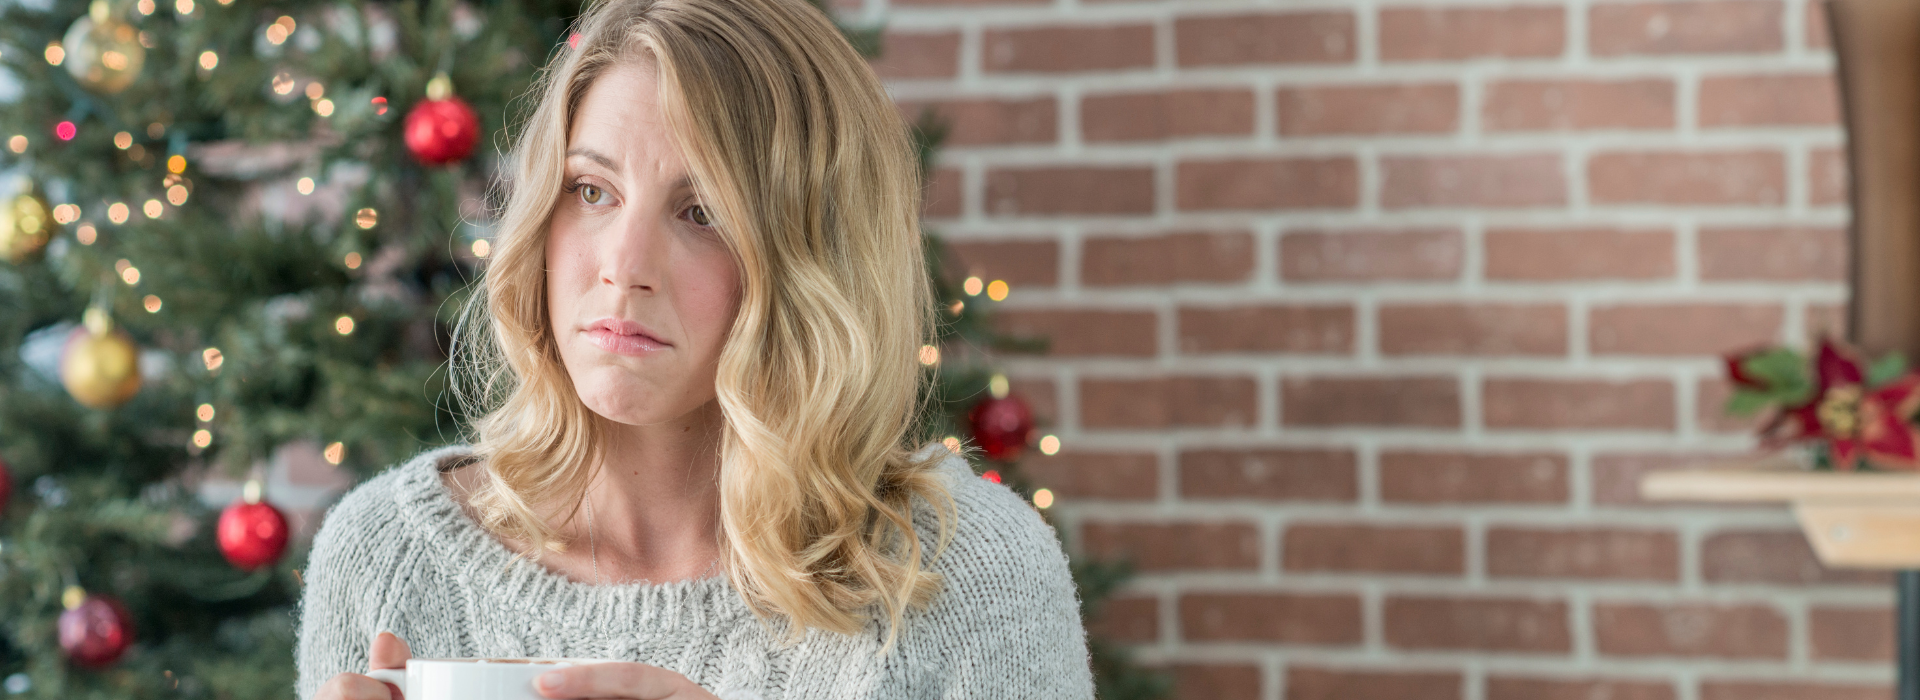 11 Ways to Have a Miserable Holiday Season